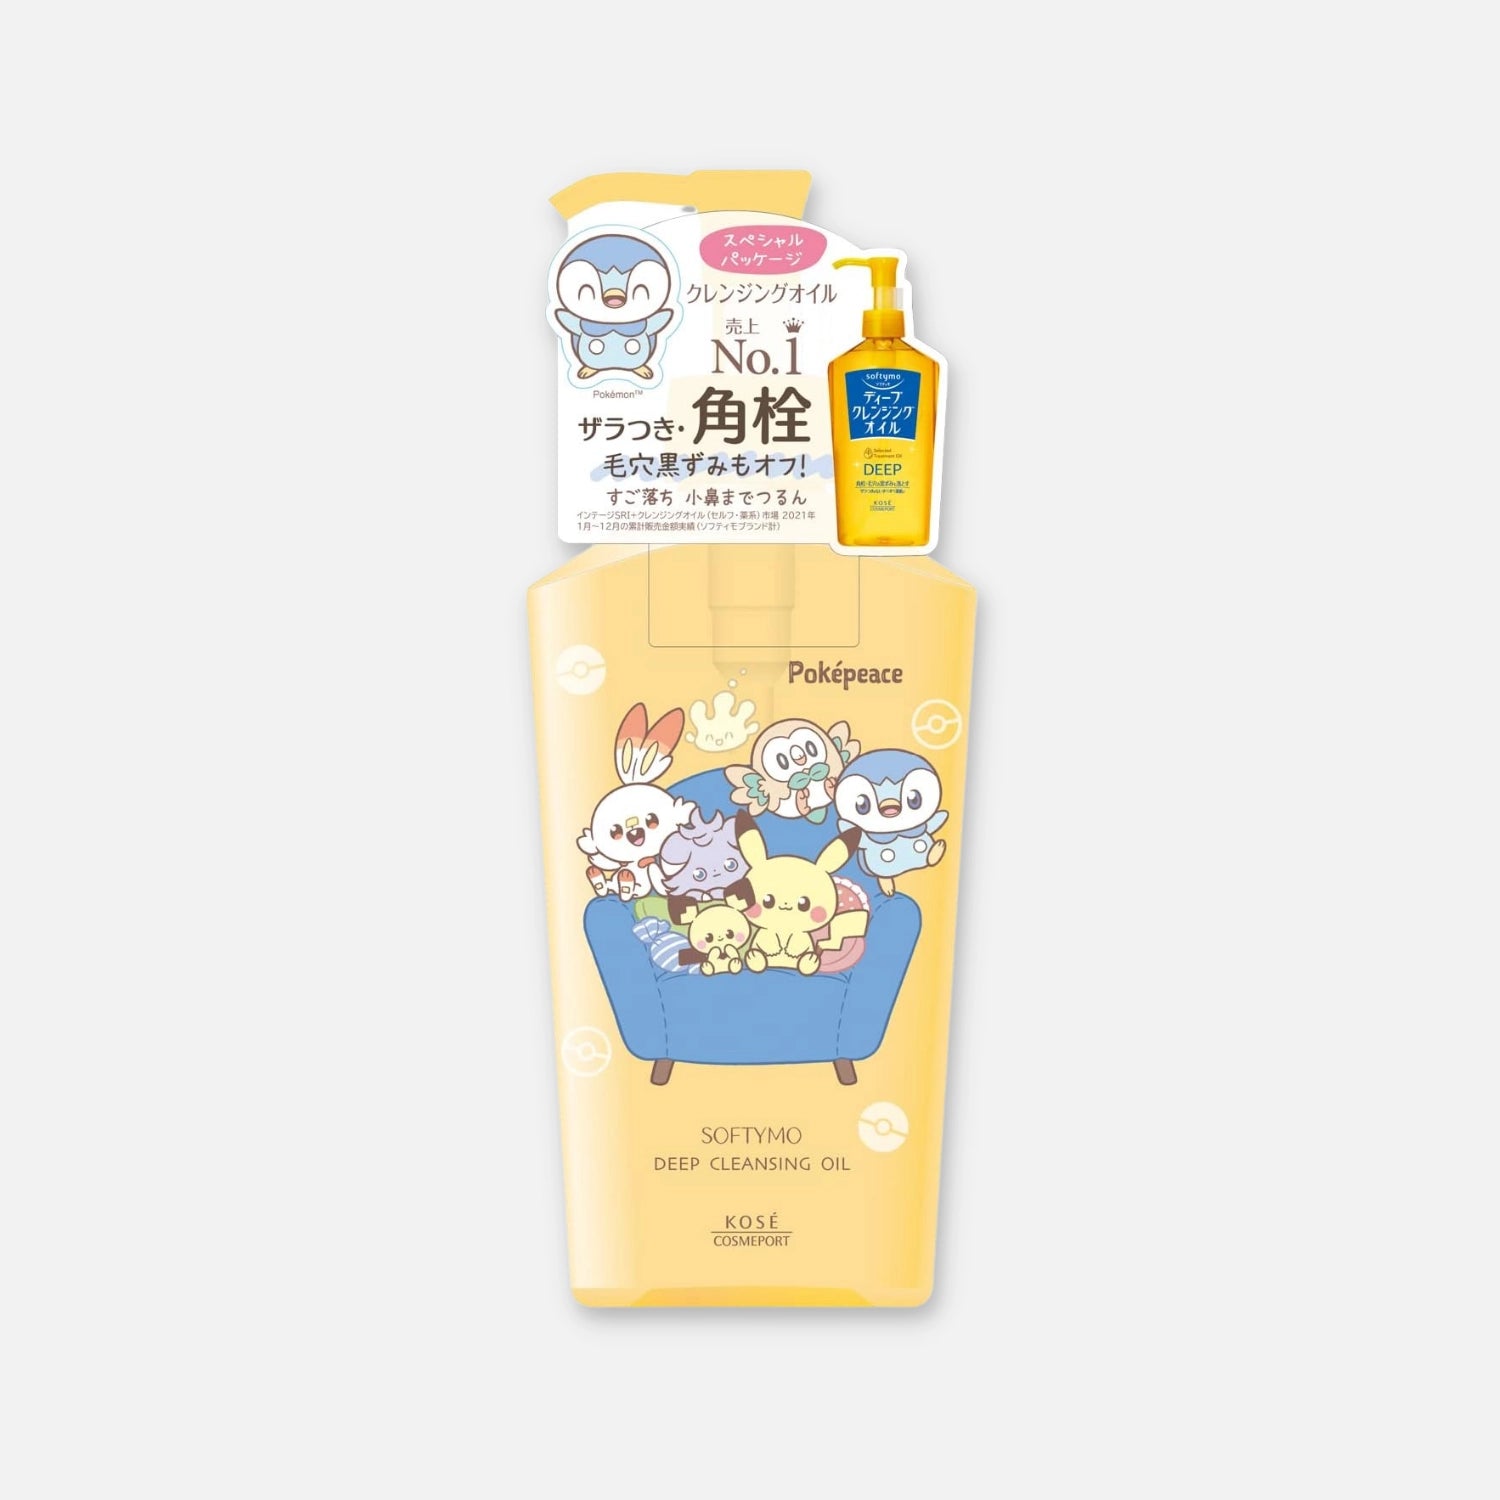 Kose Softymo Deep Cleansing Oil 230ml (Pokemon Limited Edition)